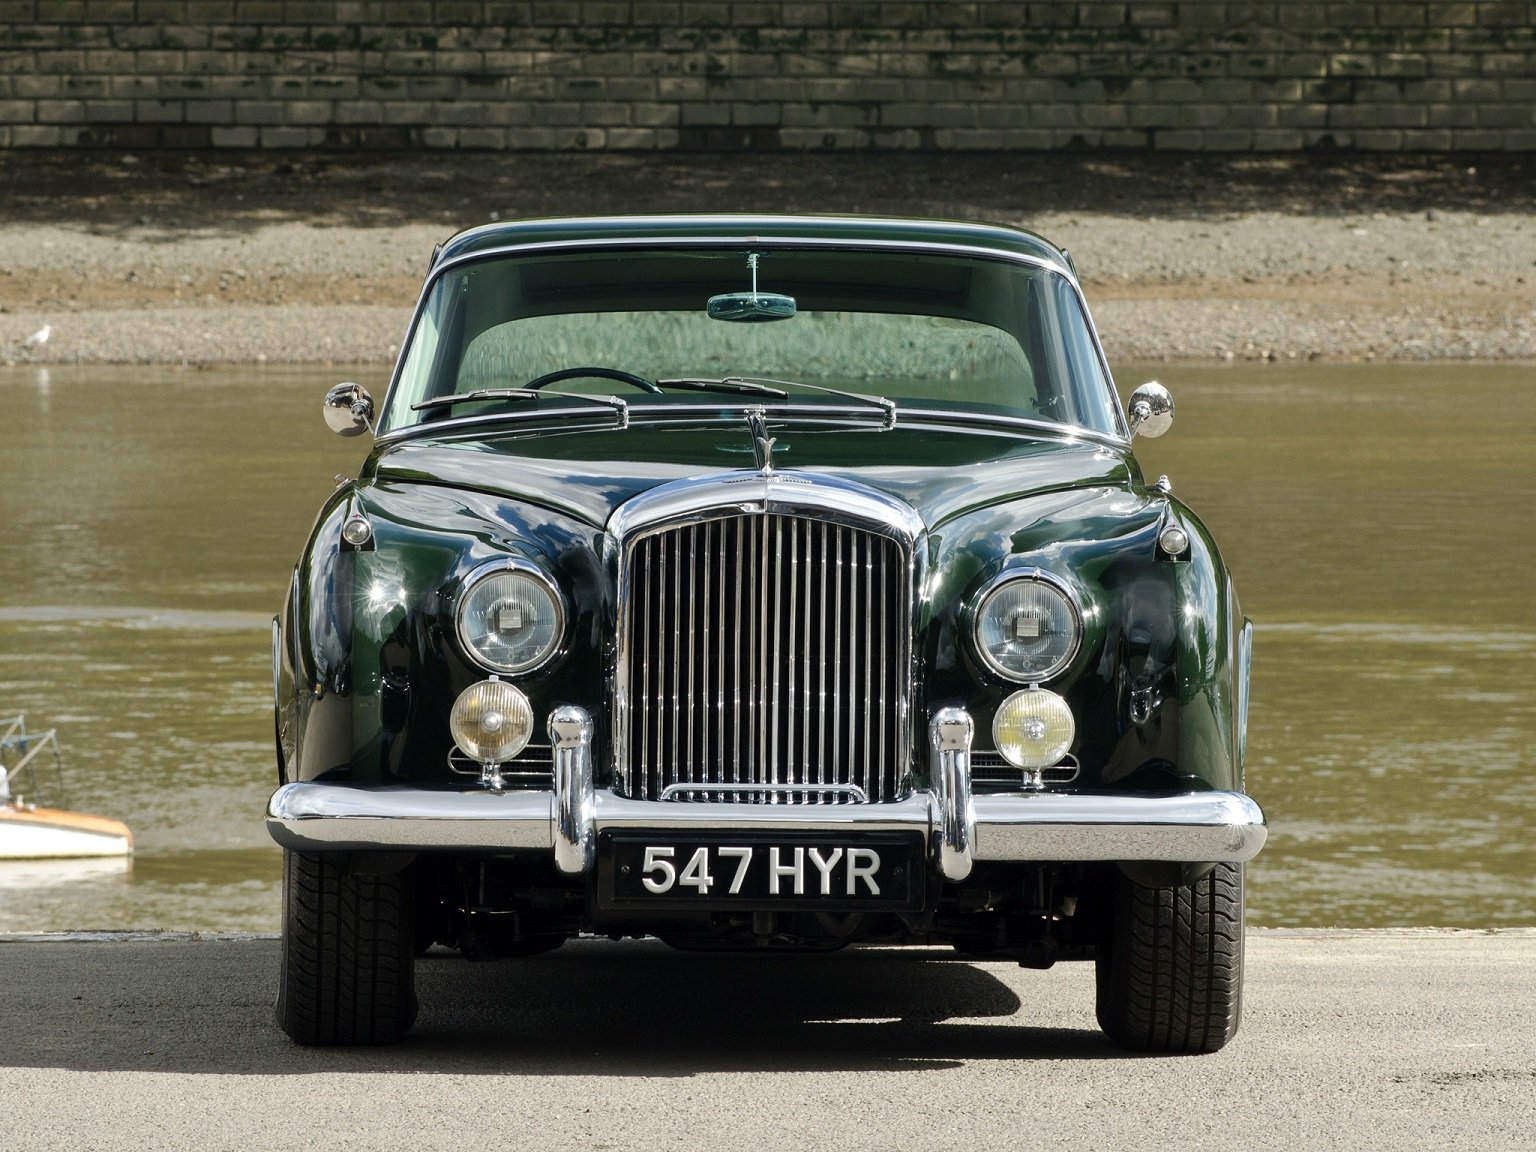 bentley s2, Continental, Coupe, Mulliner, Cars, 1960 Wallpaper